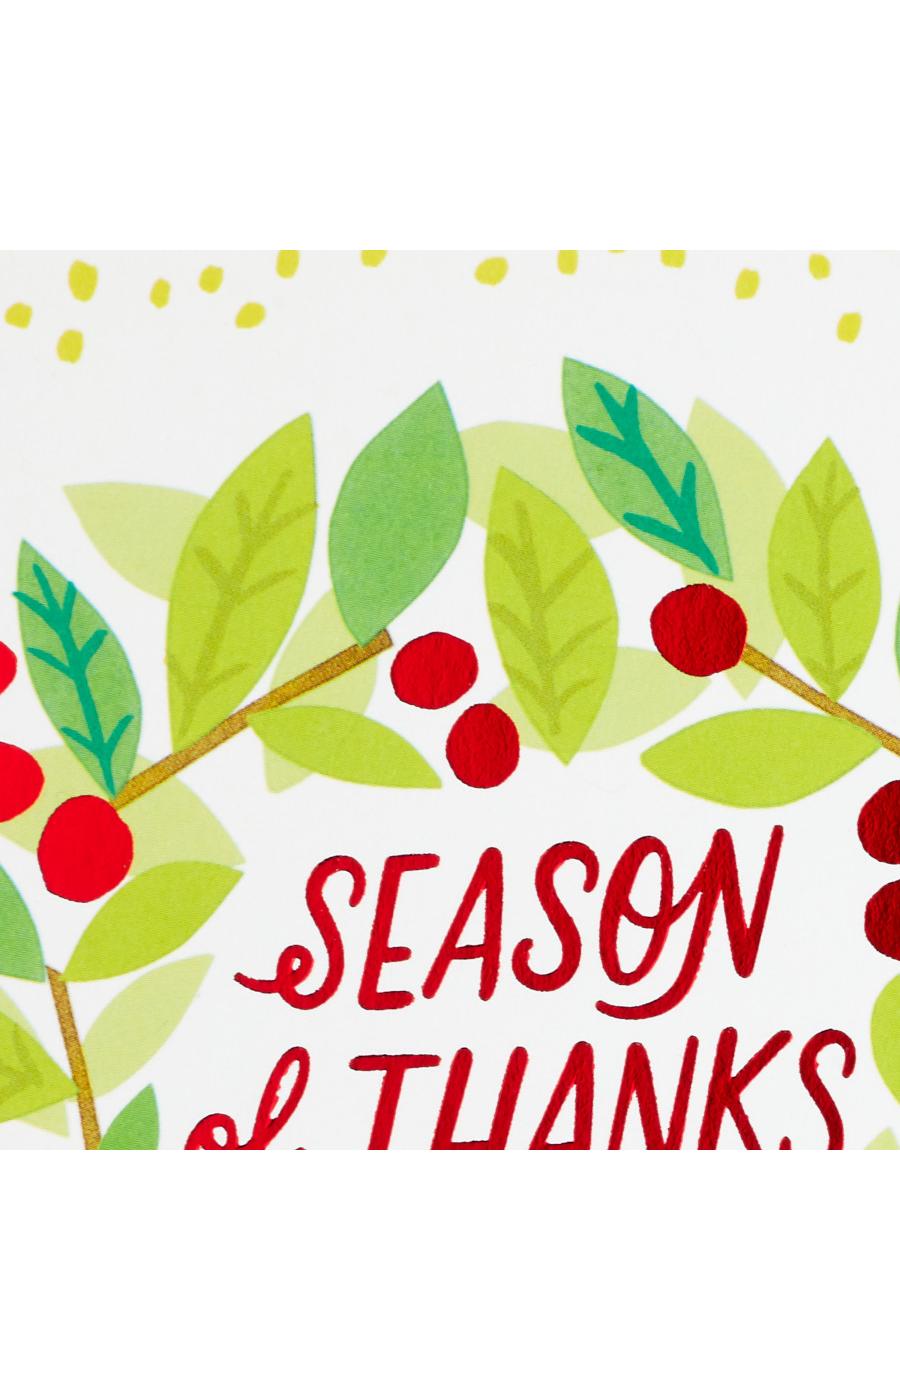 Hallmark Season of Thanks Christmas Cards with Envelopes - S1, S10; image 3 of 6